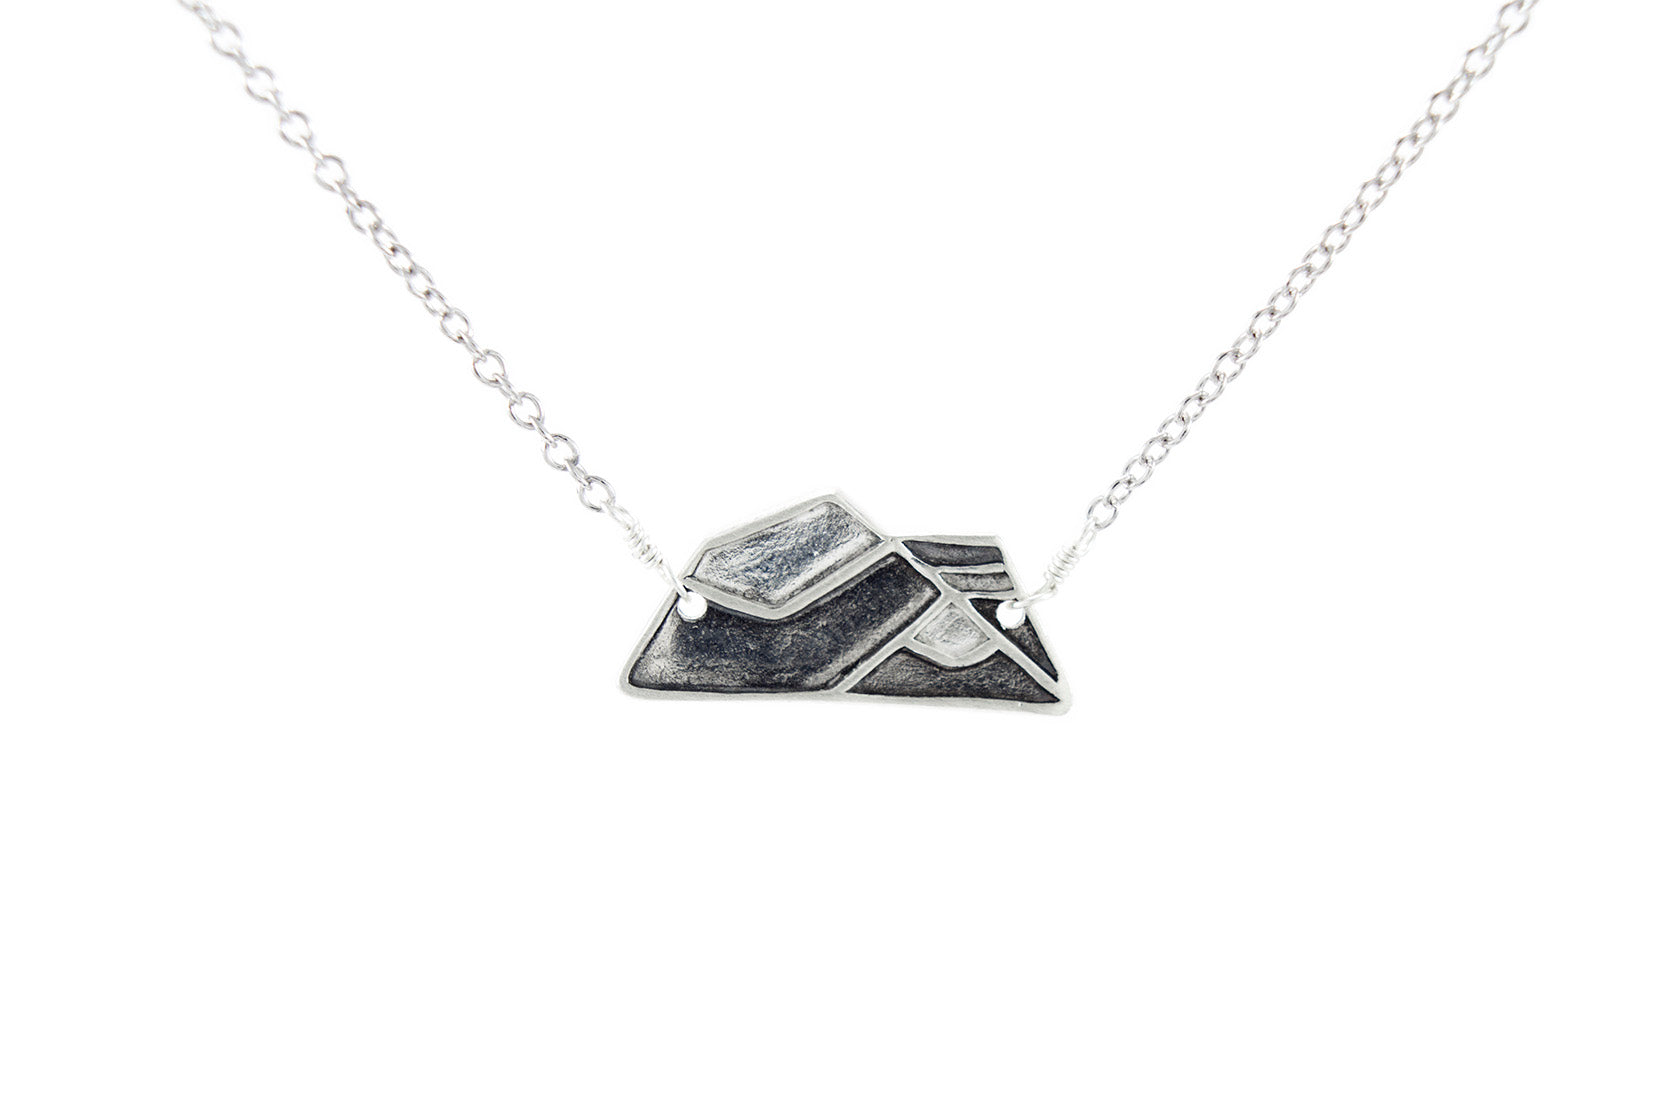 Mount Robson Necklace